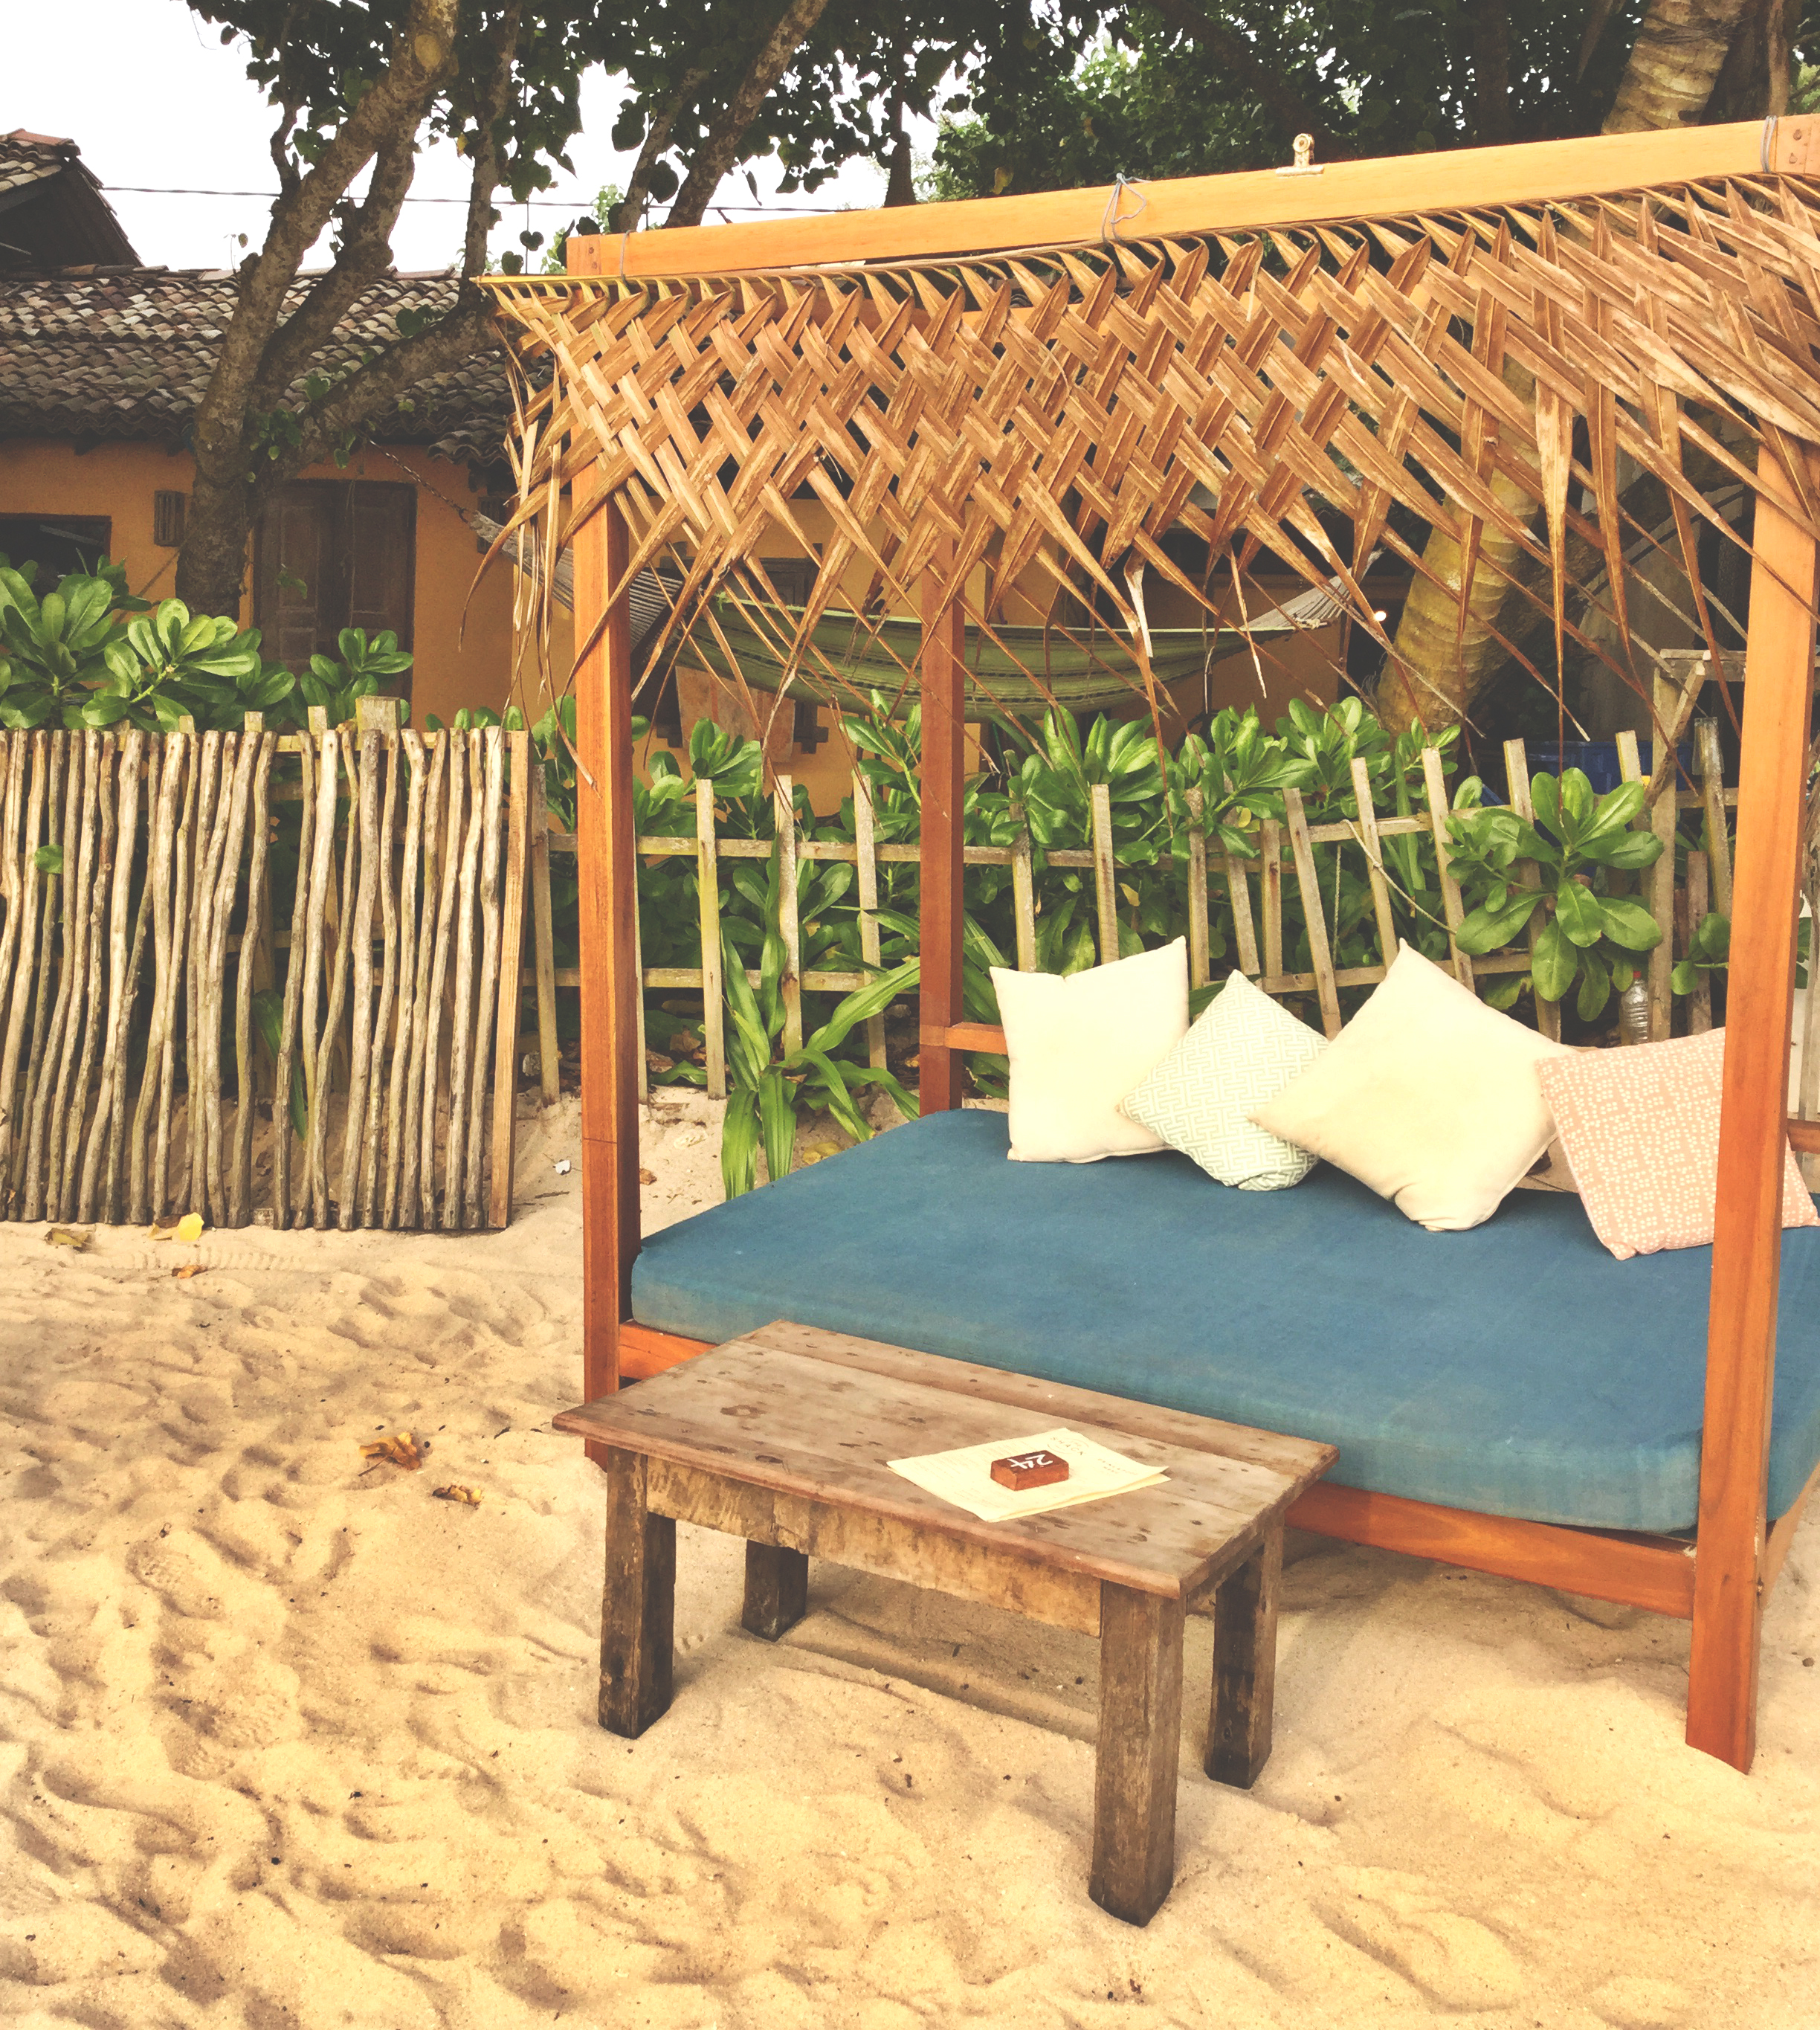 Tropical day beds at the shack 